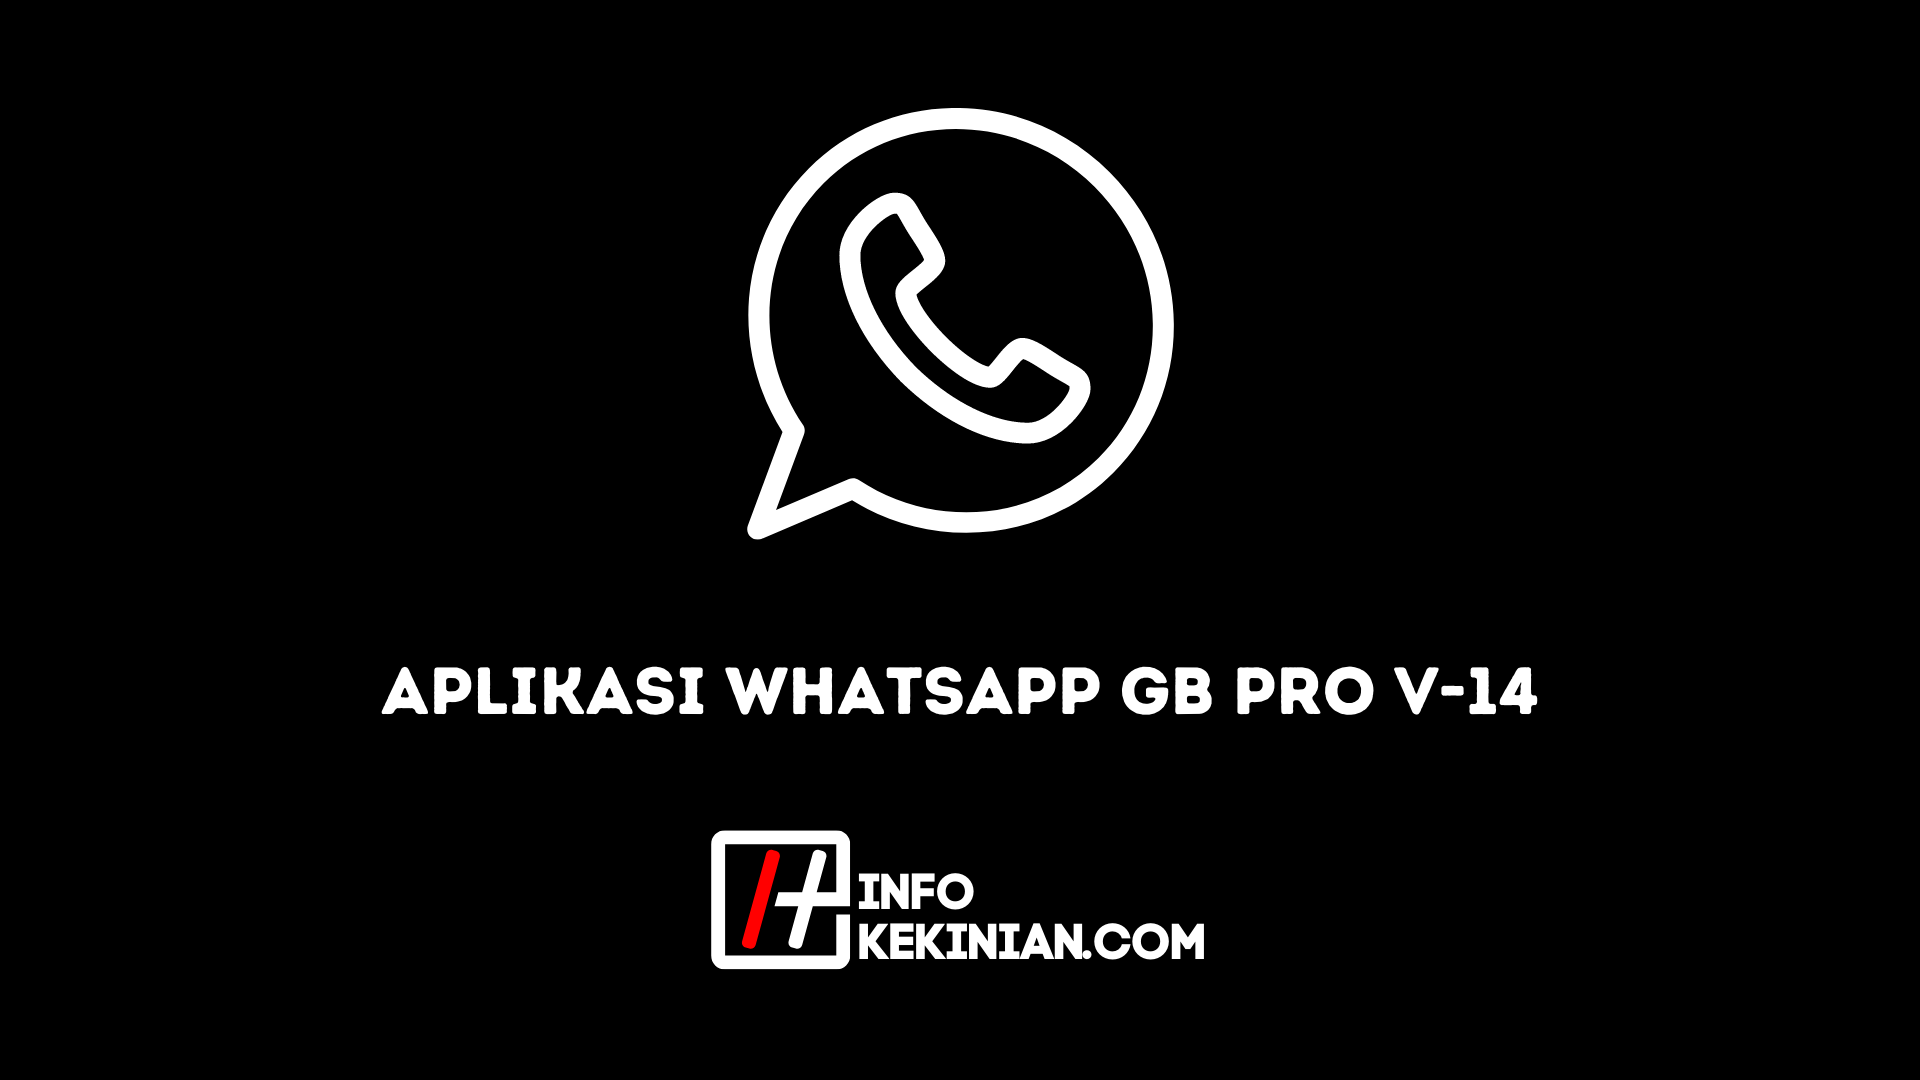 The WhatsApp Gb Pro V 14 application, let's see